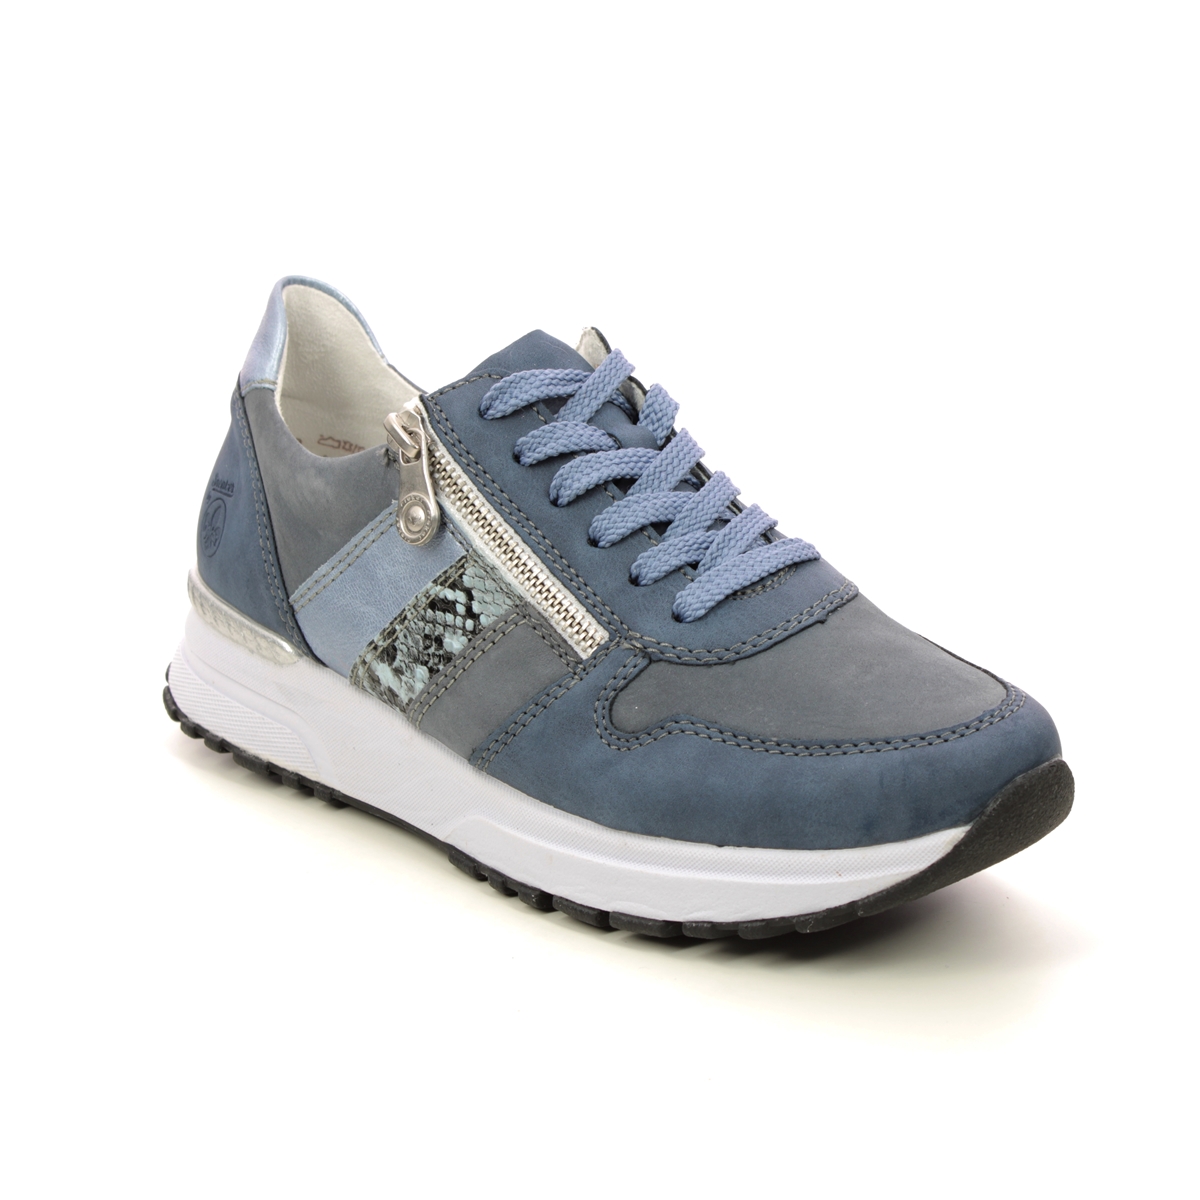 Rieker Govict Denim Leather Womens Trainers N7421-14 In Size 39 In Plain Denim Leather